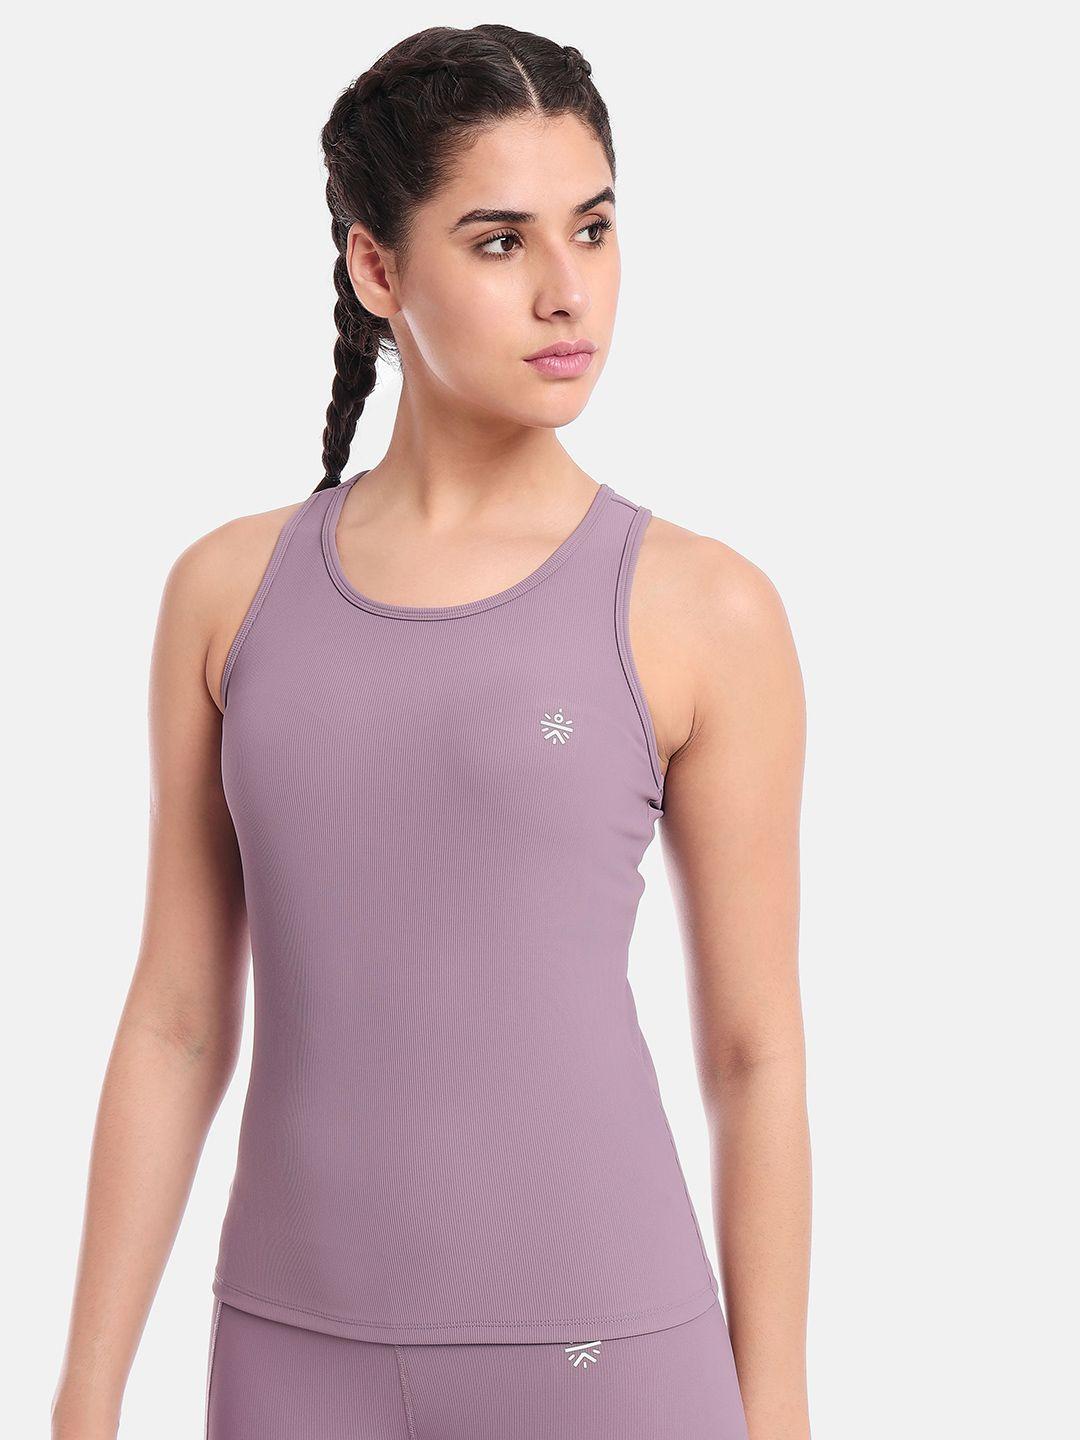 cultsport round neck racerback ribbed sports tank top